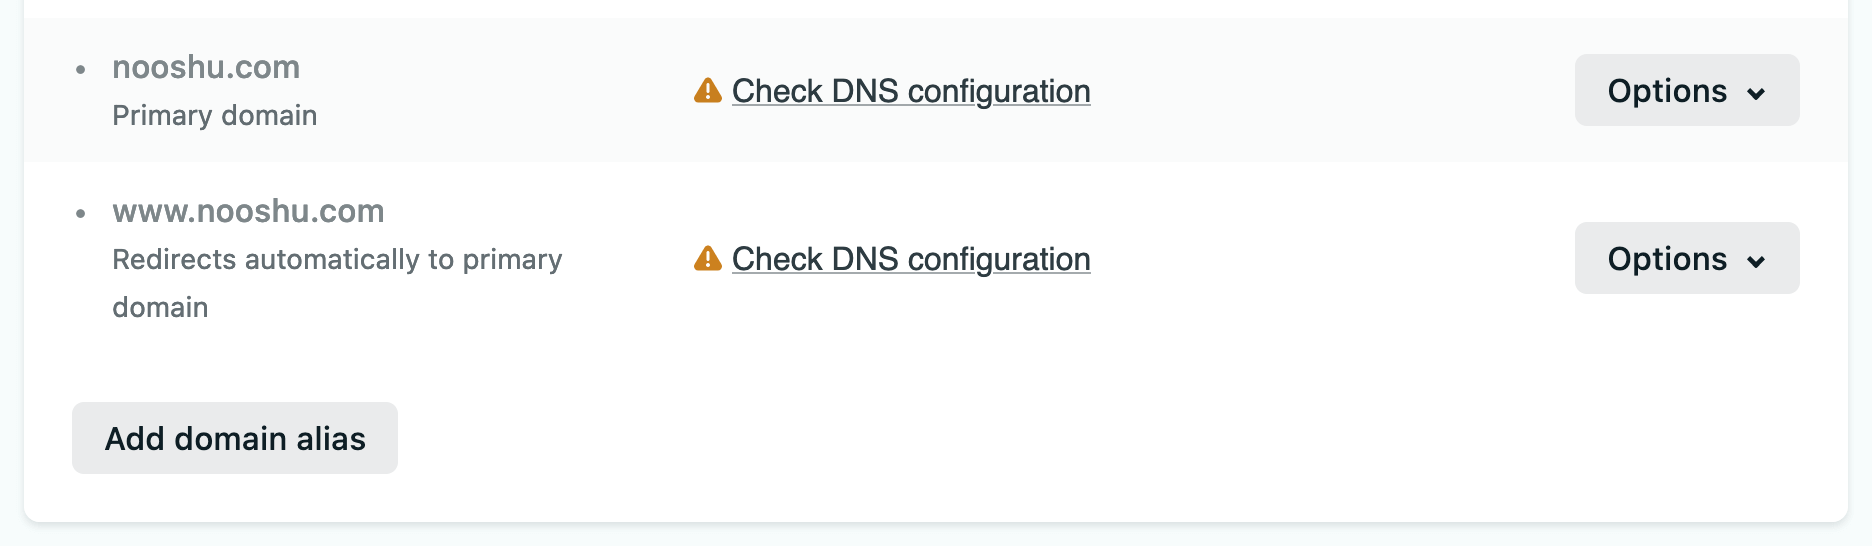 Netlify DNS settings with errors that can be ignored.